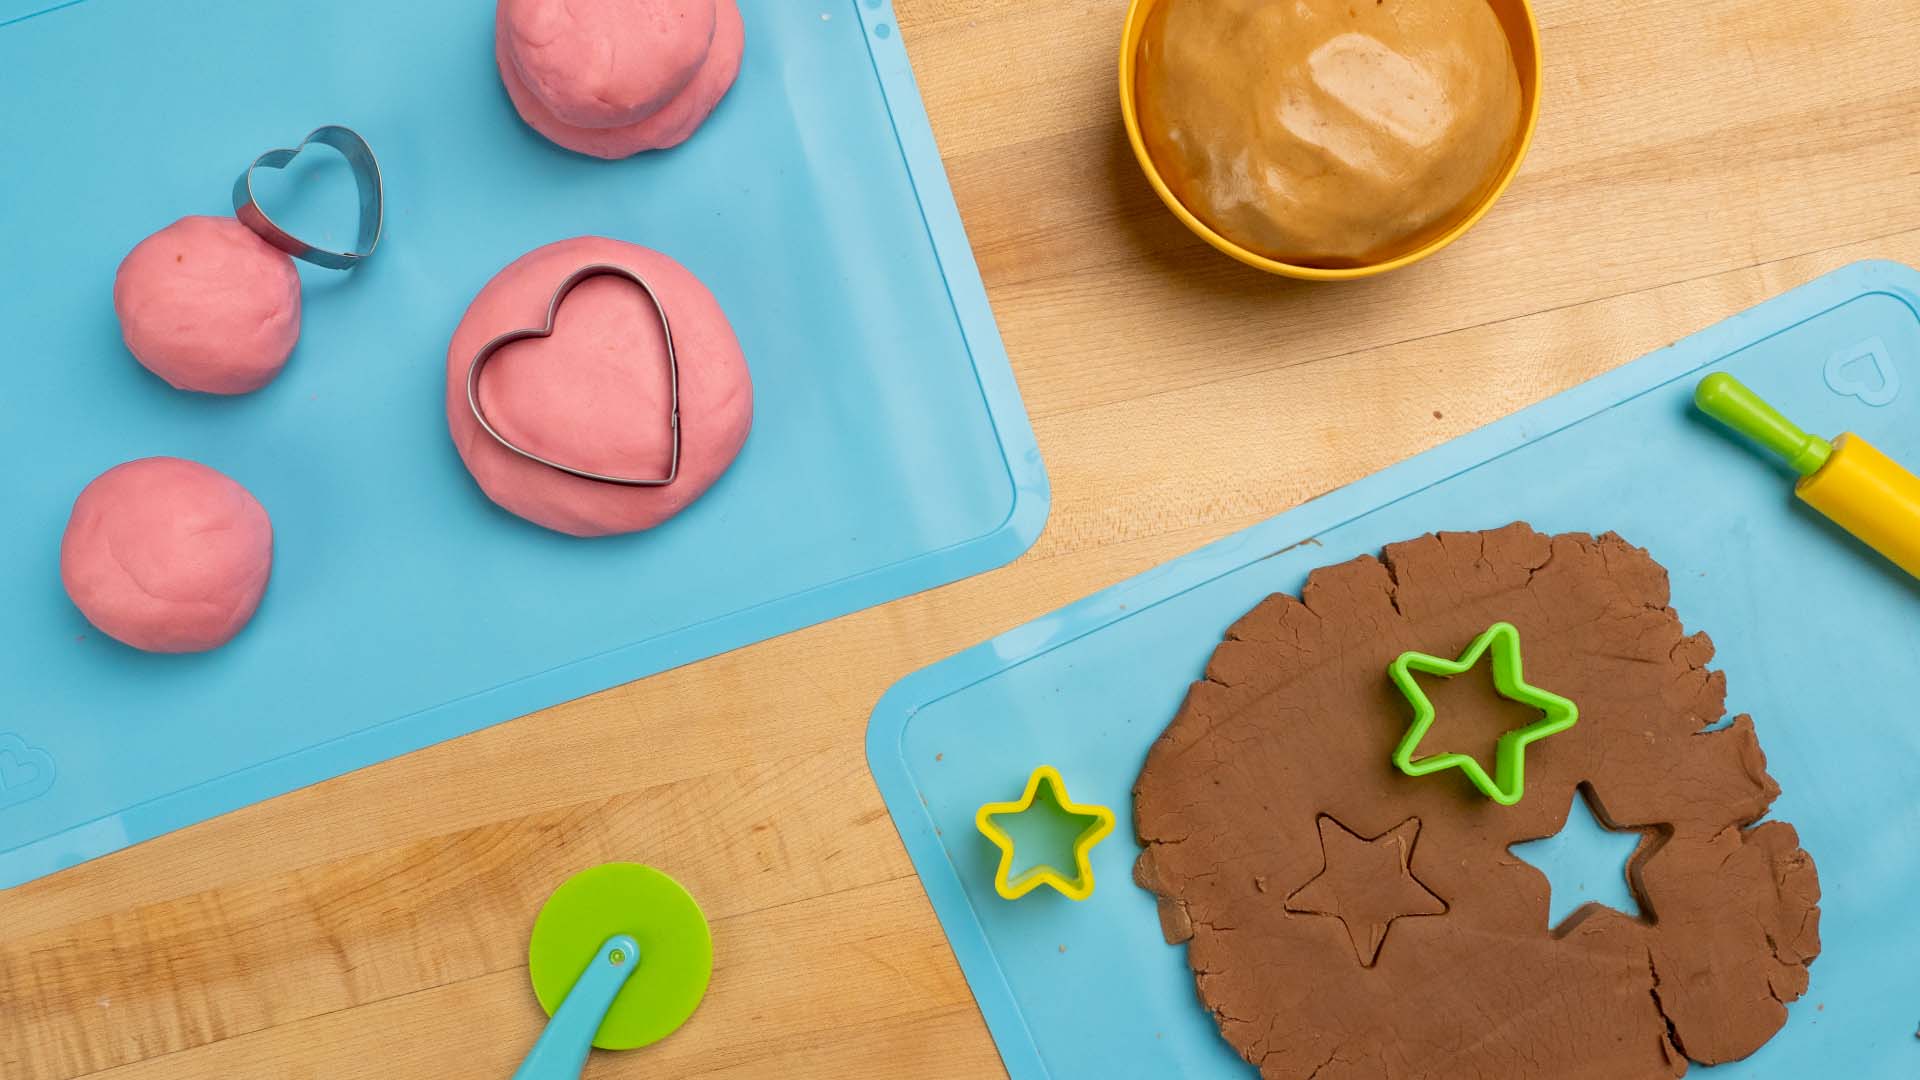 taste safe play dough being shaped into stars and hearts